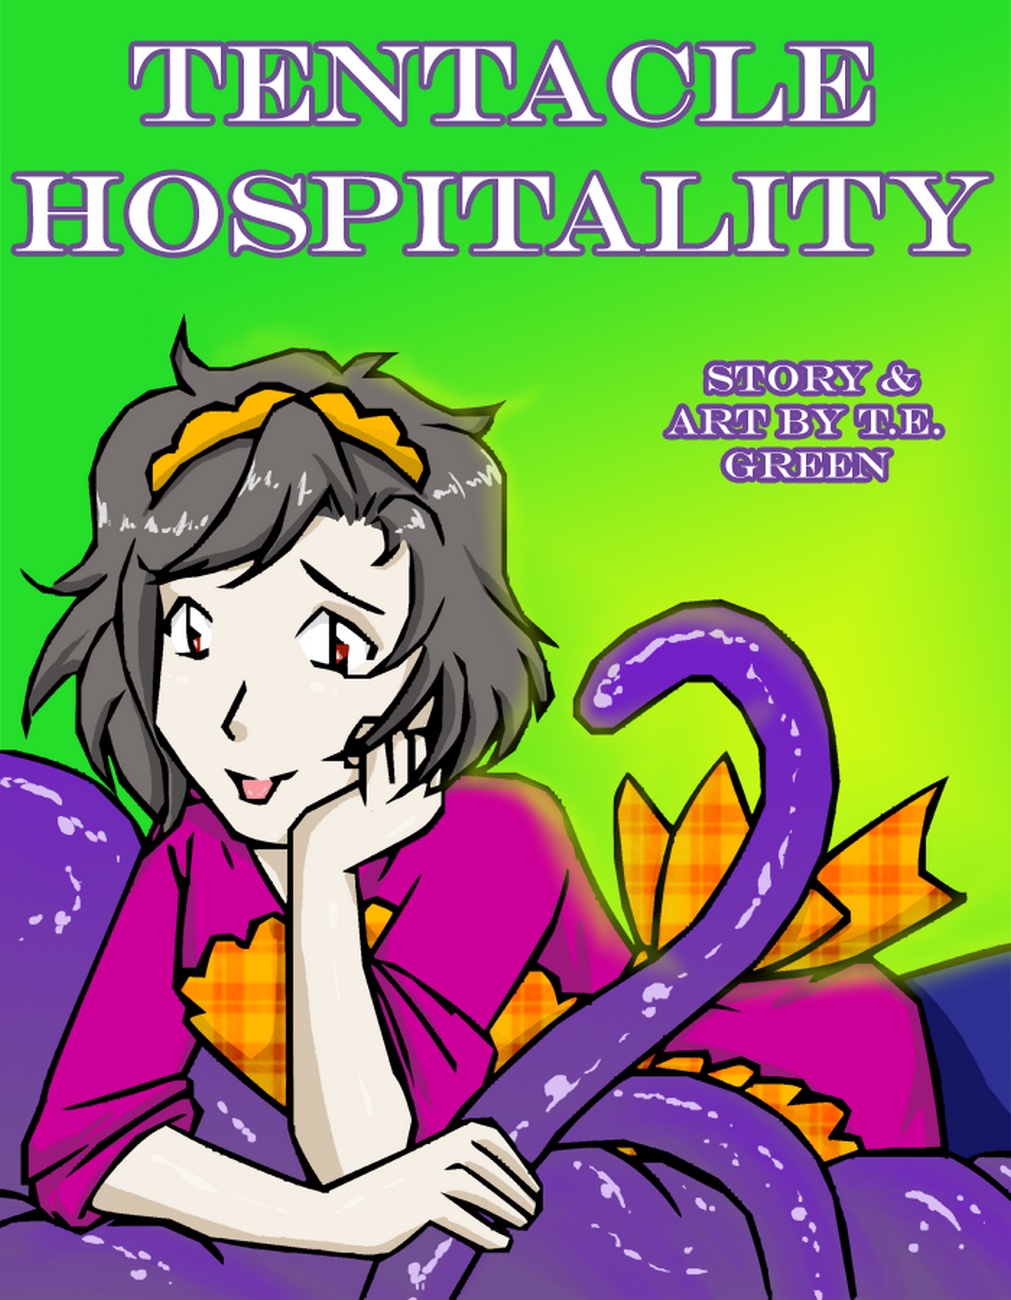 A Date With A Tentacle Monster 3 - Tentacle Hospitality